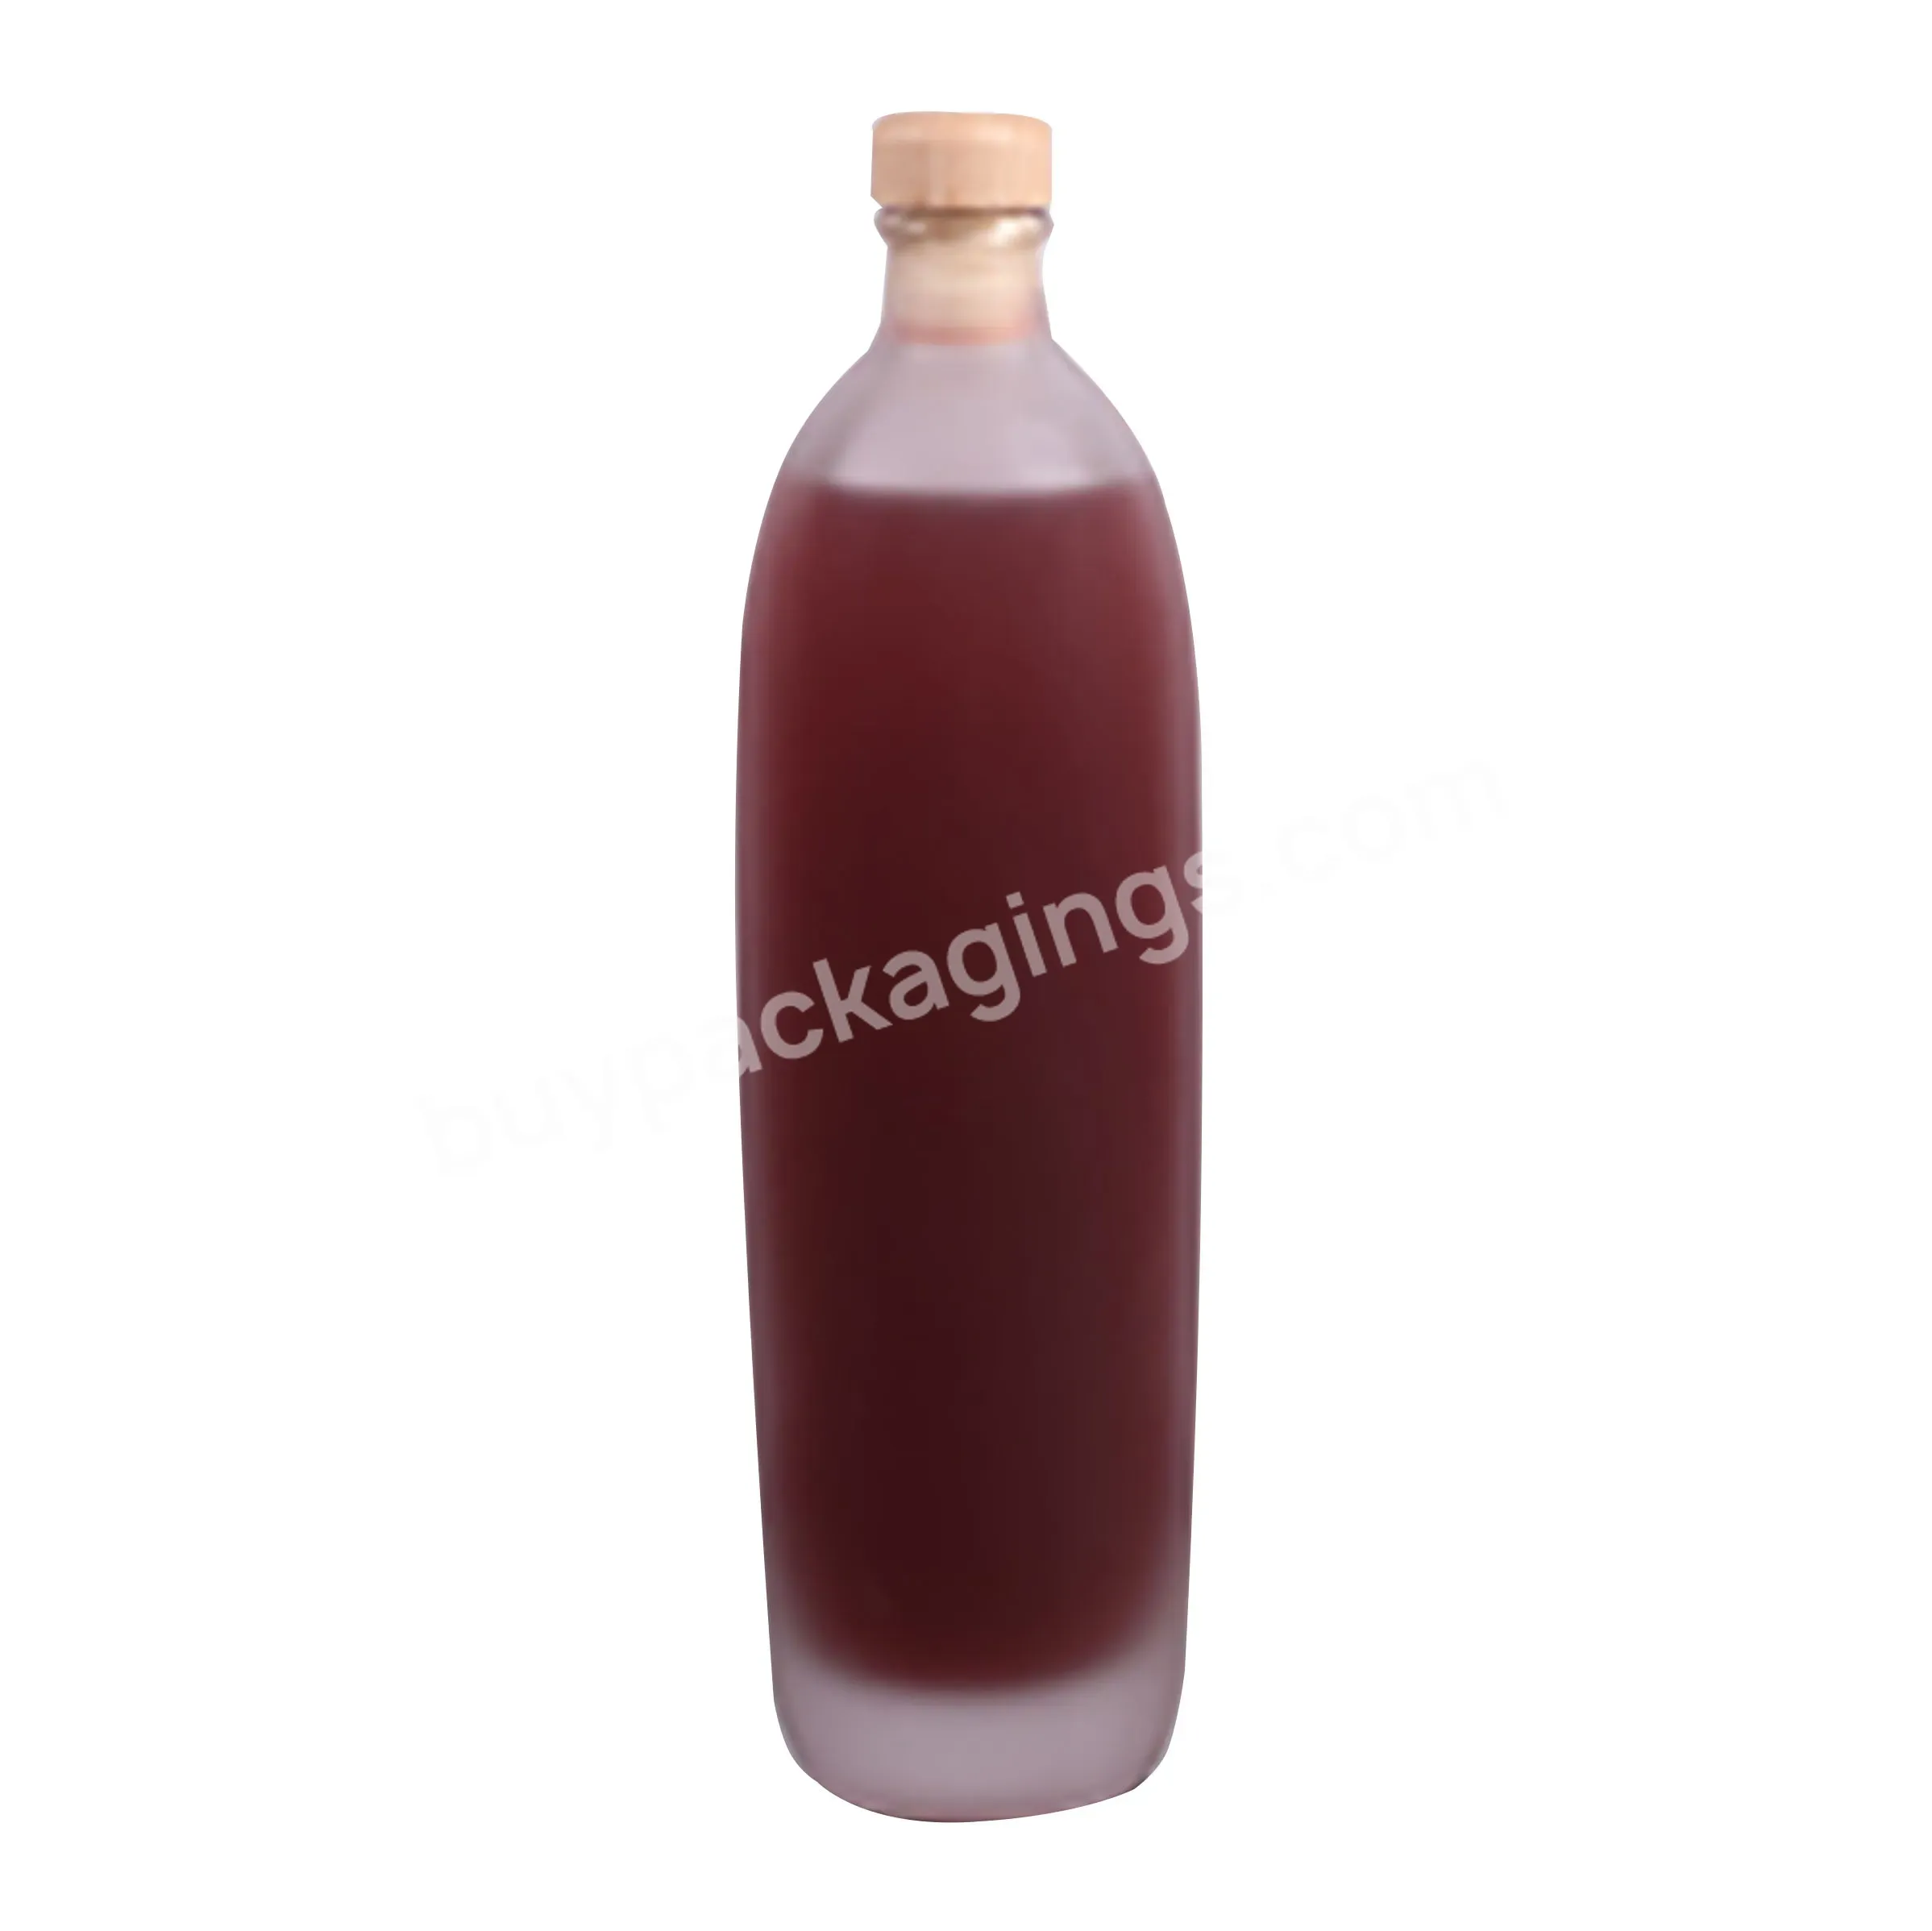 Hot Sale Clear Frosted Glass Bottle With Cork For Beverage Milk Wine Juice 100ml 120ml - Buy Clear Frosted Glass Bottle With Cork 100ml 150ml,Clear Frosted Glass Bottle With Cork For Beverage,Glass Bottle With Cork For Beverage Milk Wine Juice.